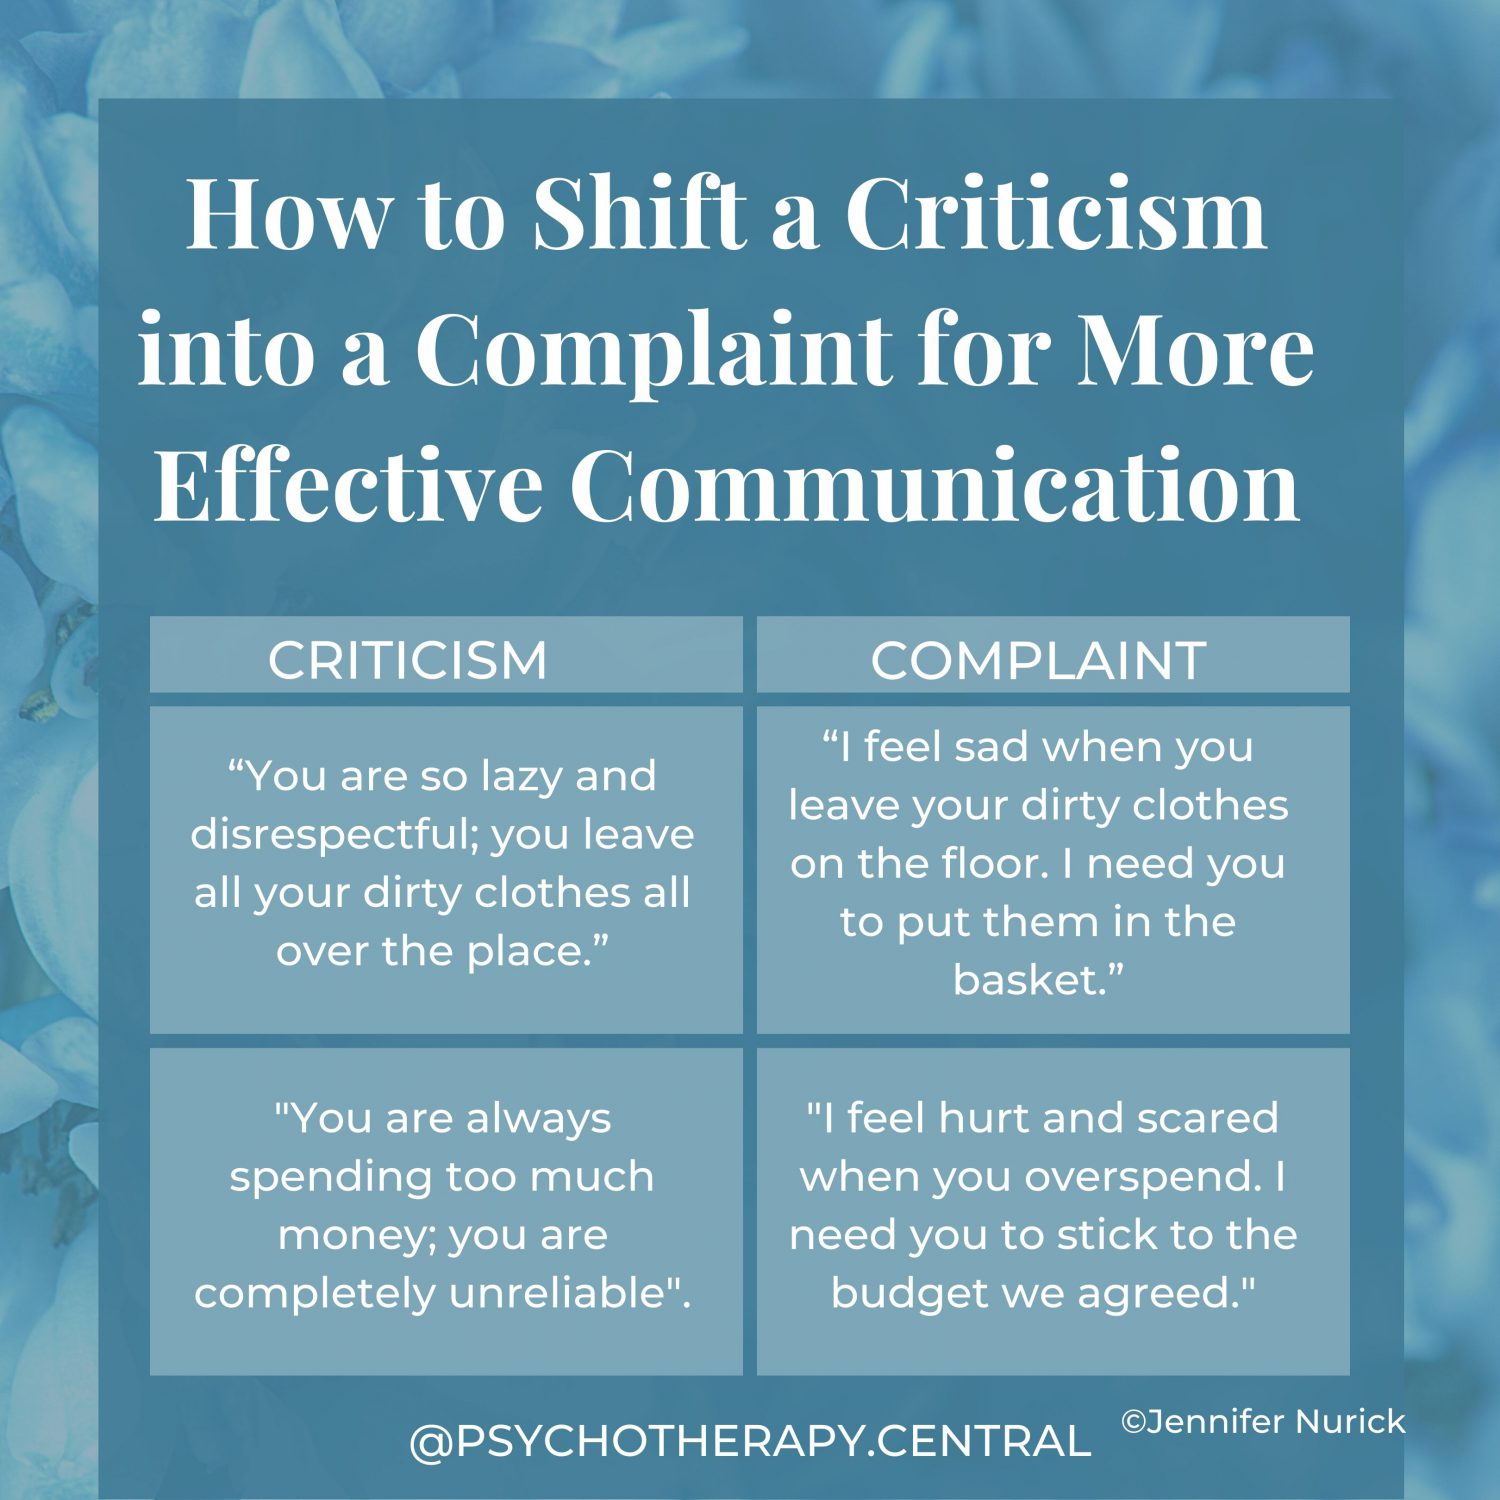 How to Shift a Criticism into a Complaint for More Effective Communication Criticism “You are so lazy and disrespectful; you leave all your dirty clothes all over the place.” Complaint “I feel sad when you leave your dirty clothes on the floor. I need you to put them in the basket.” Criticism "You are always spending too much money; you are completely unreliable". Complaint "I feel hurt and scared when you overspend. I need you to stick to the budget we agreed."